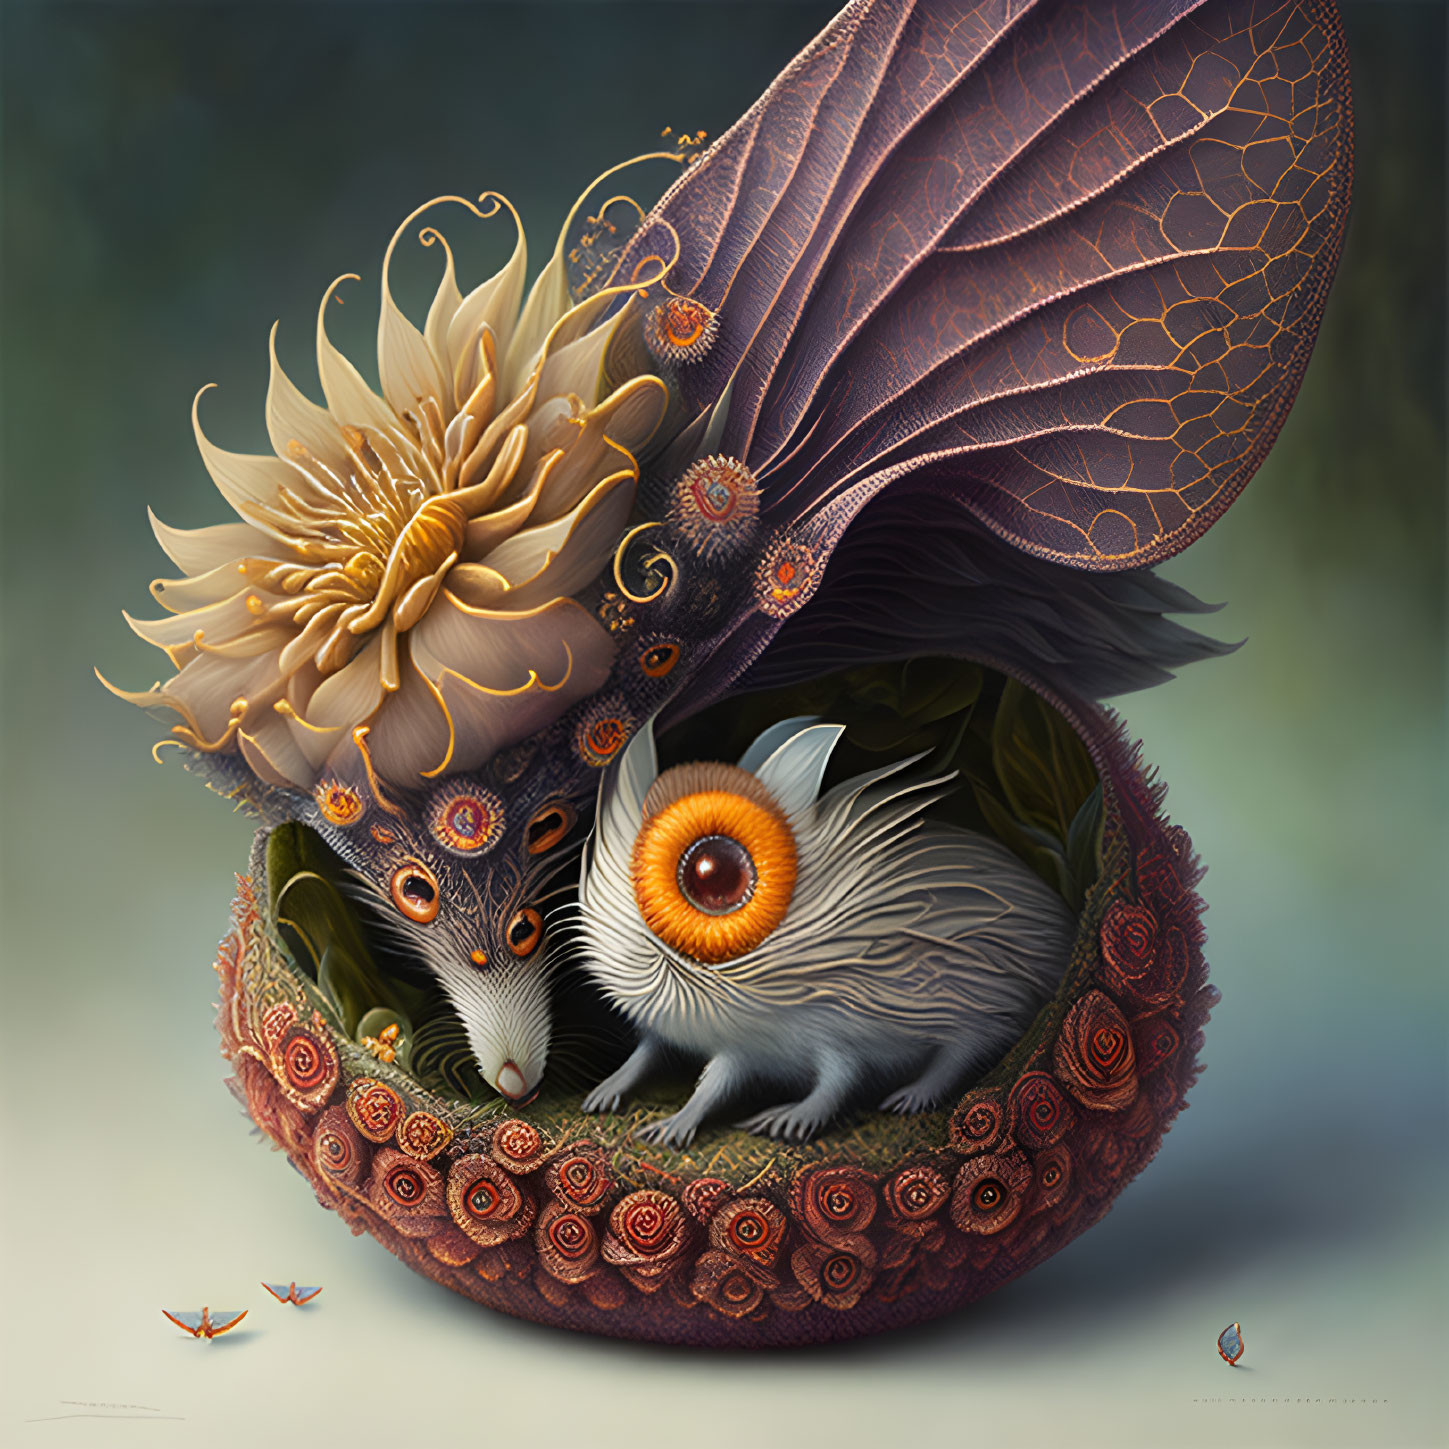 Illustration of Creature with Large Eye in Rose Bowl with Butterflies